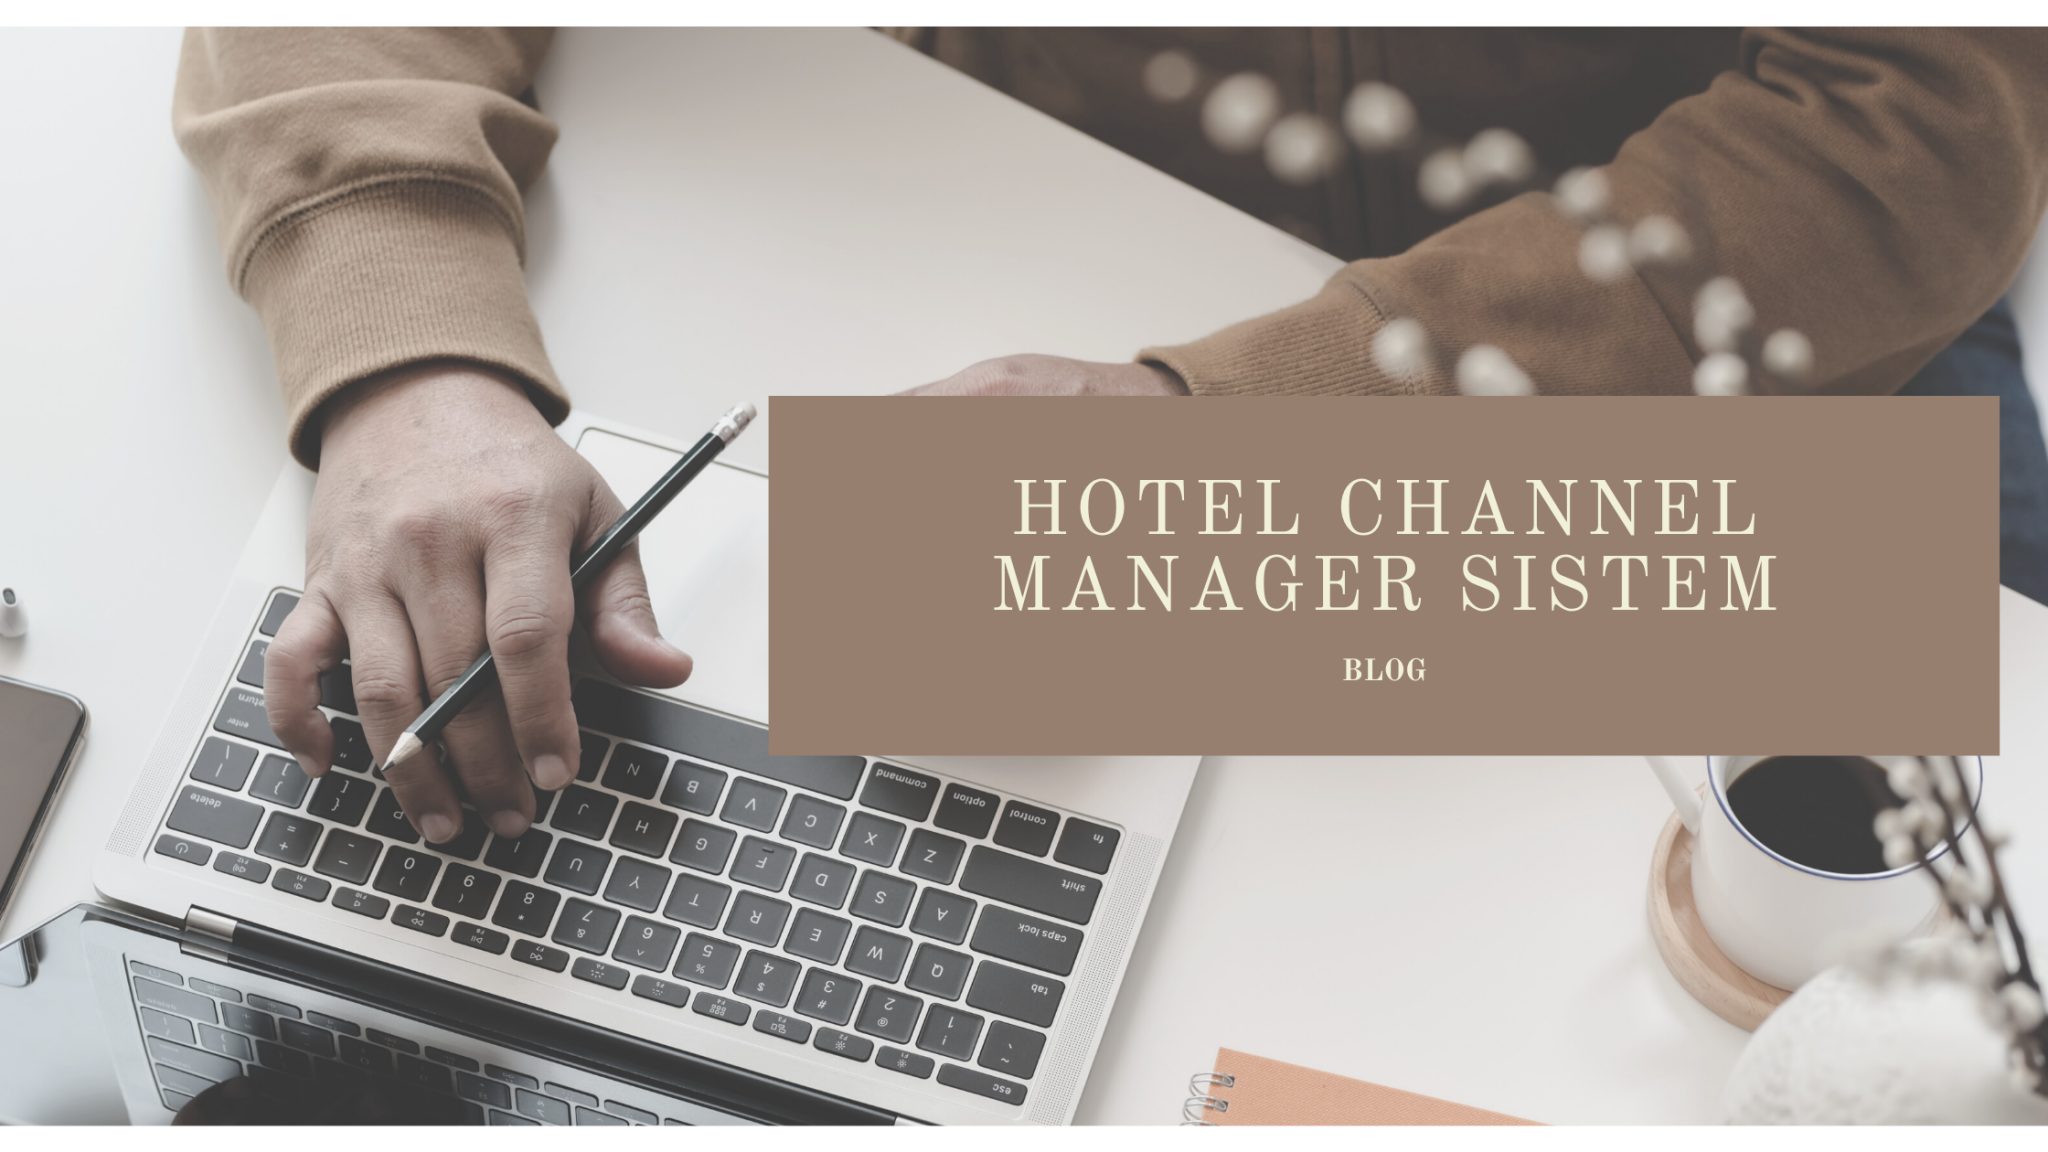 Hotel Channel Manager System